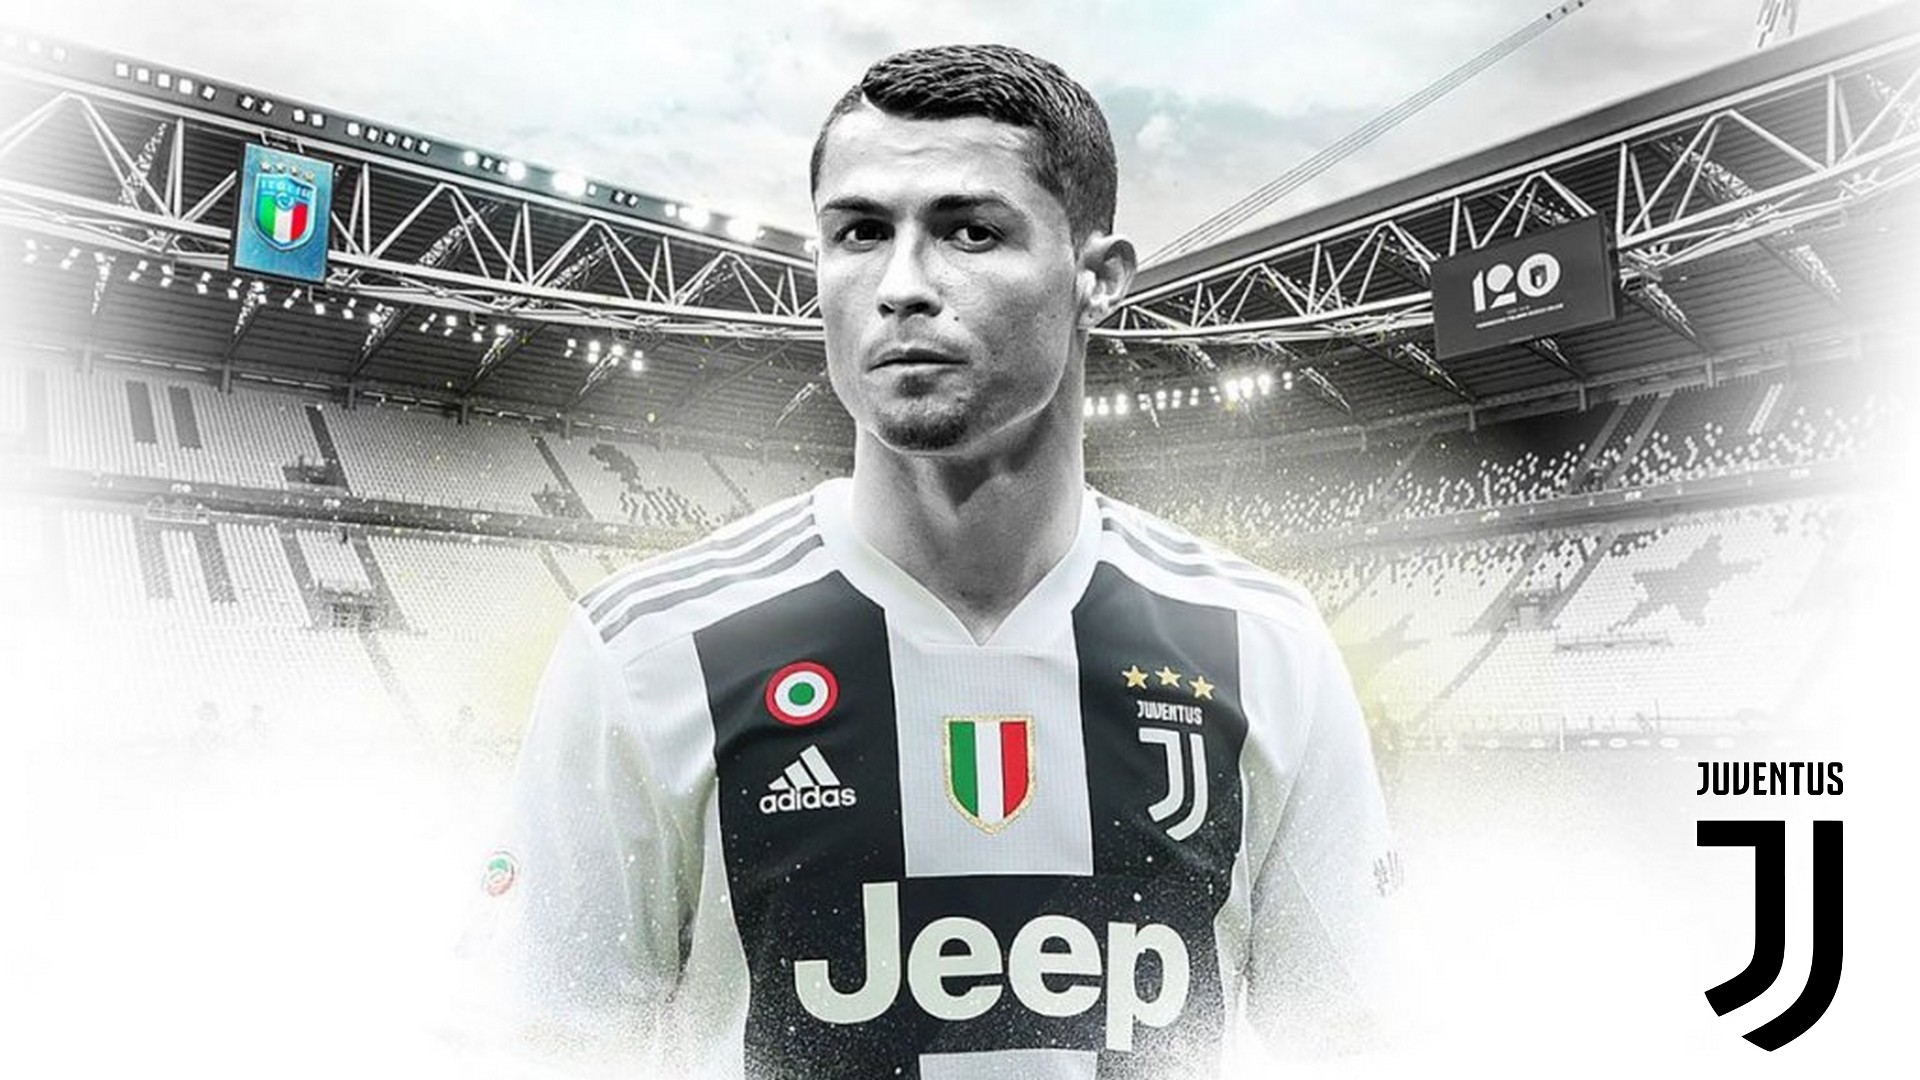 Wallpapers HD Ronaldo 7 Juventus With Resolution 1920X1080 pixel. You can make this wallpaper for your Mac or Windows Desktop Background, iPhone, Android or Tablet and another Smartphone device for free